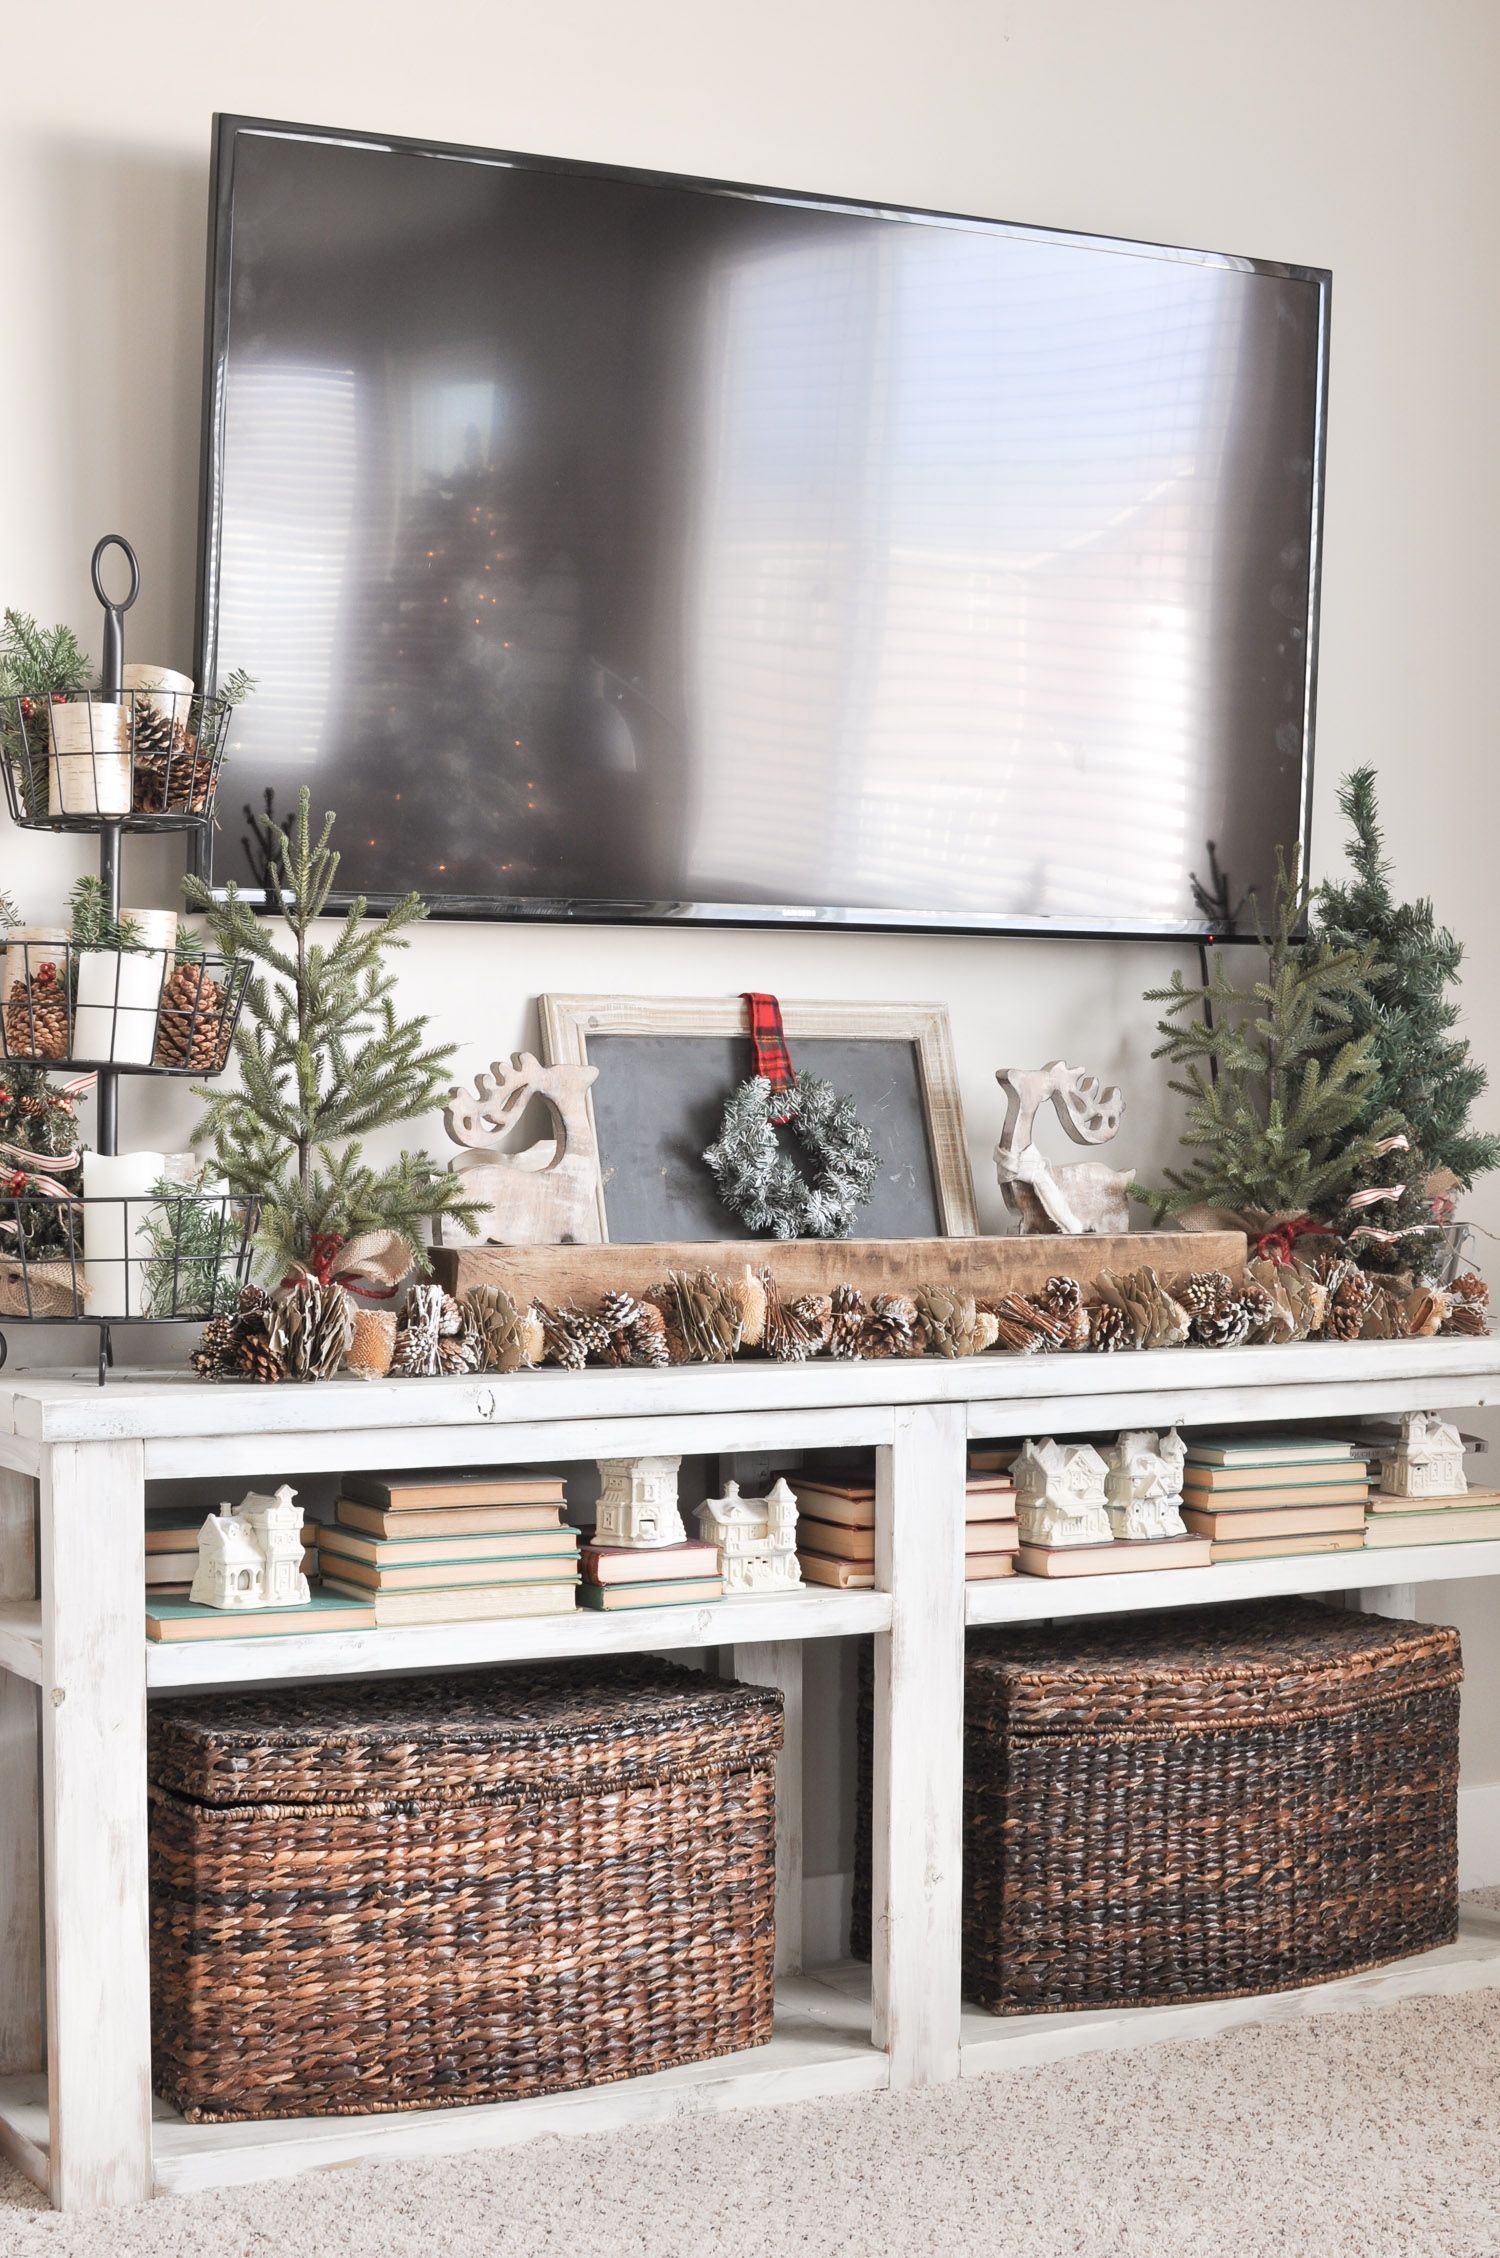 Neutral Christmas Living Room Tour - Cherished Bliss - Neutral Christmas Living Room Tour - Cherished Bliss -   14 xmas decorations living room diy crafts ideas